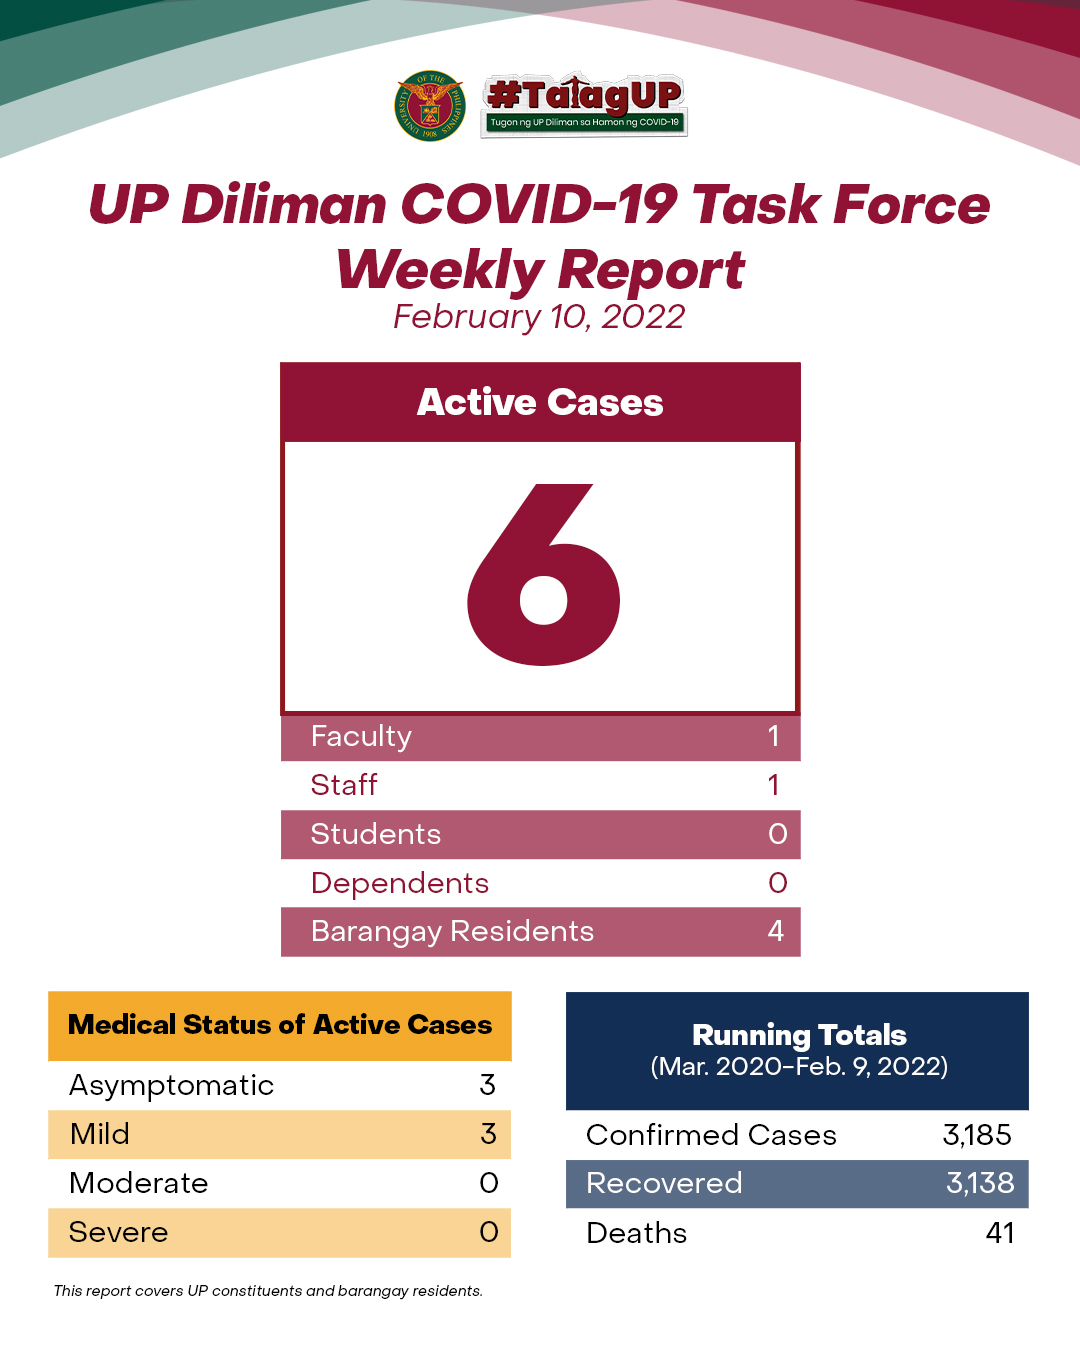 UP Diliman COVID-19 Task Force Weekly Report (February 10, 2022)